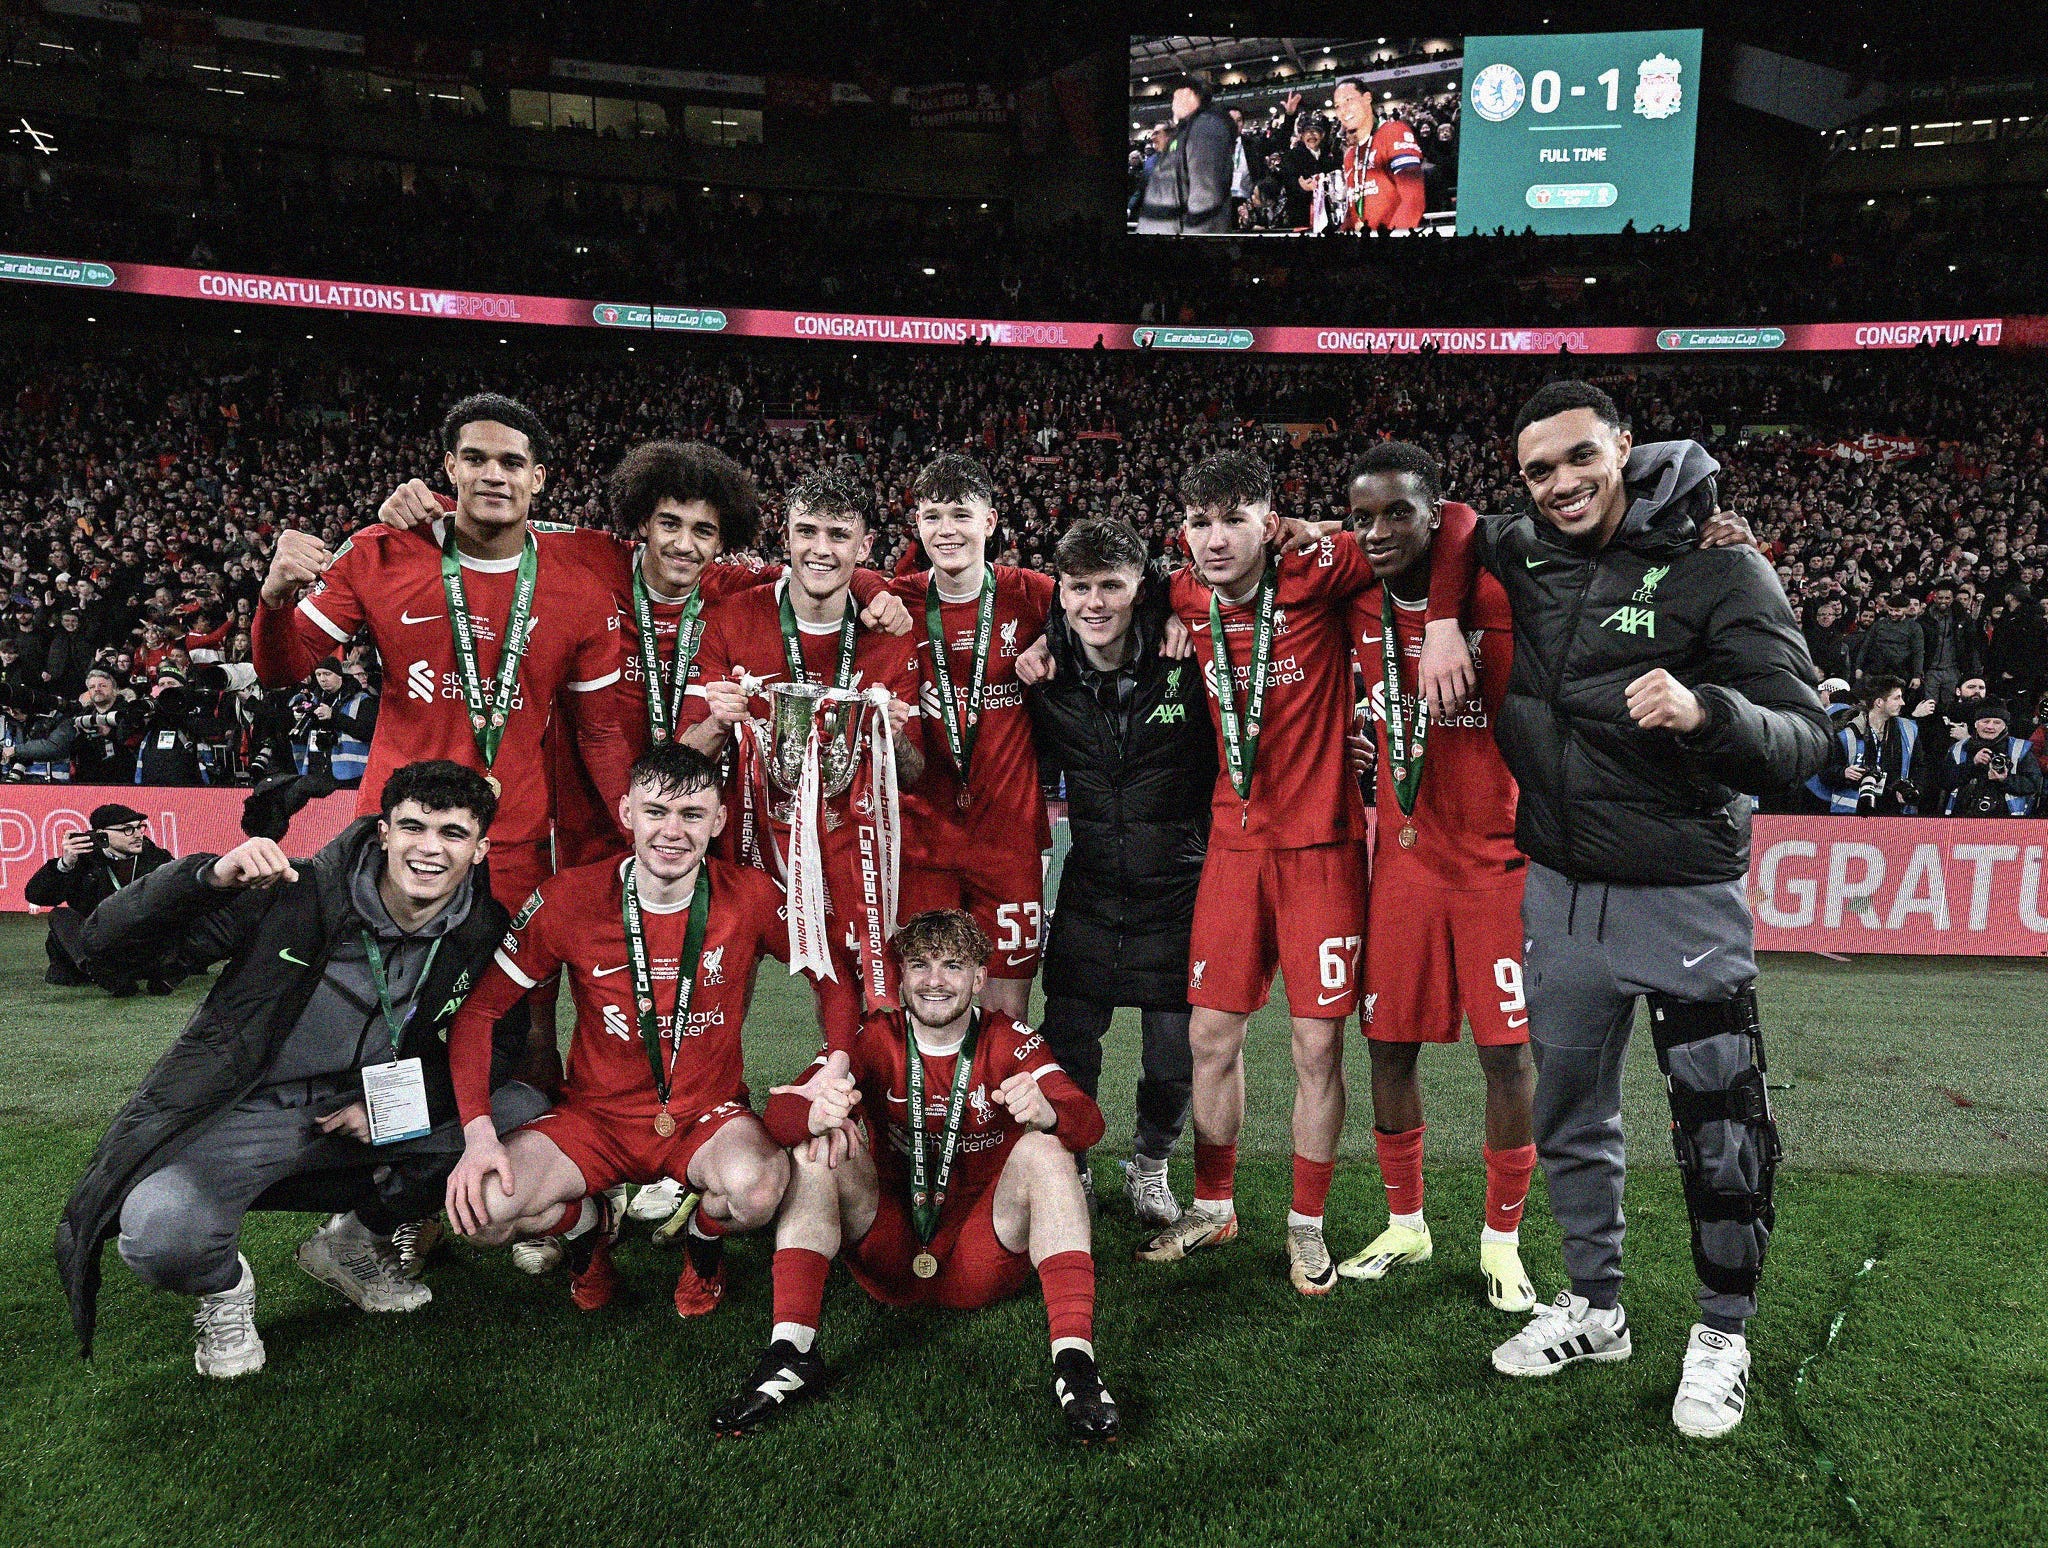 A photo of Liverpool's academy players with the League Cup trophy. They're wearing an all-red kit, stood arm-in-arm, celebrating in front of the Liverpool end at Wembley.